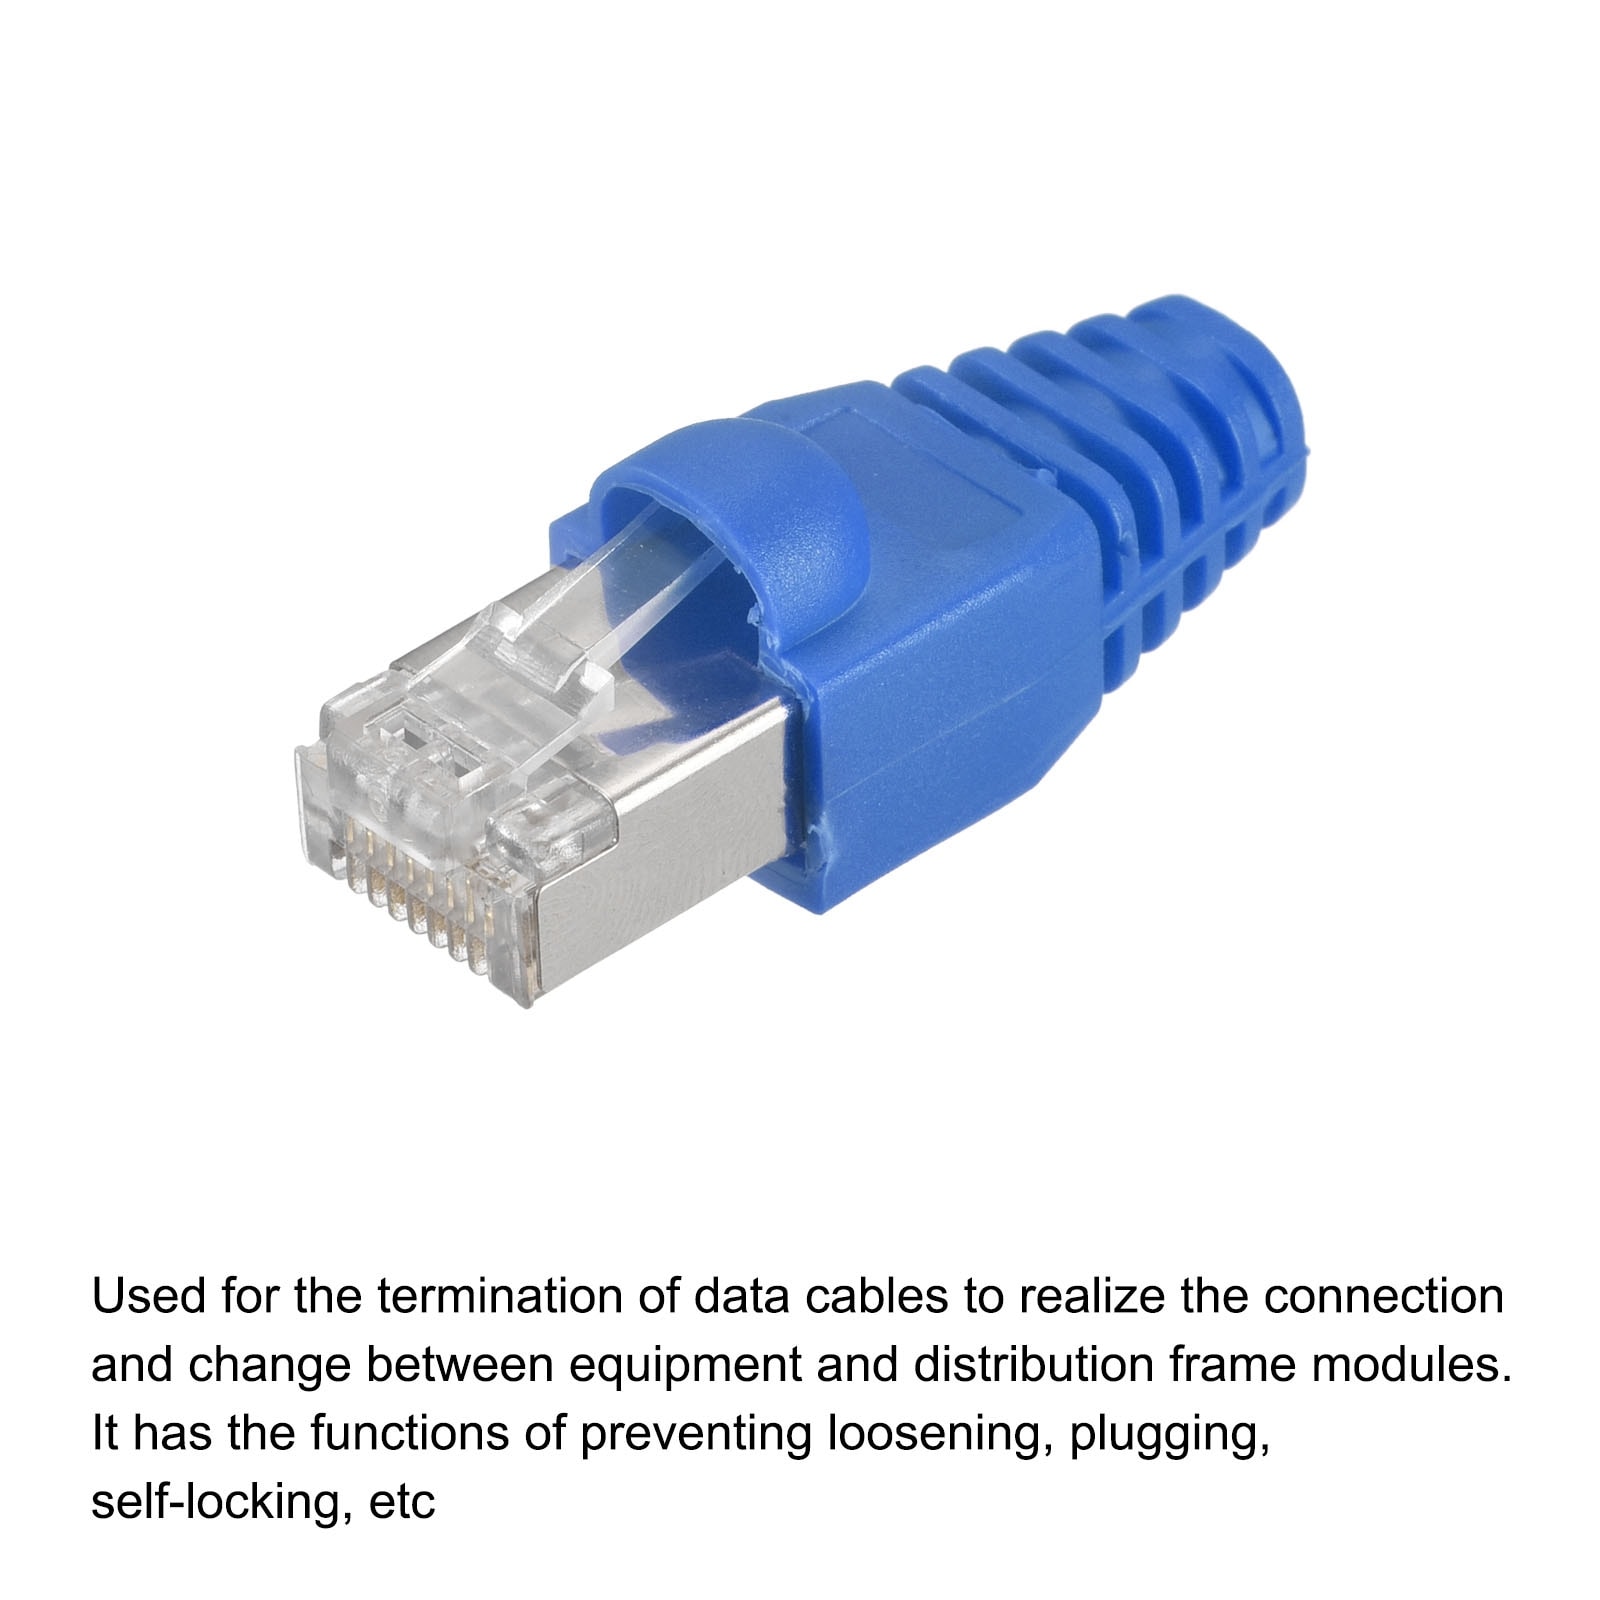 RJ45 Cat6 Shielded Connector Modular Plugs Pass Through 8p8c Connector - 20 Pack